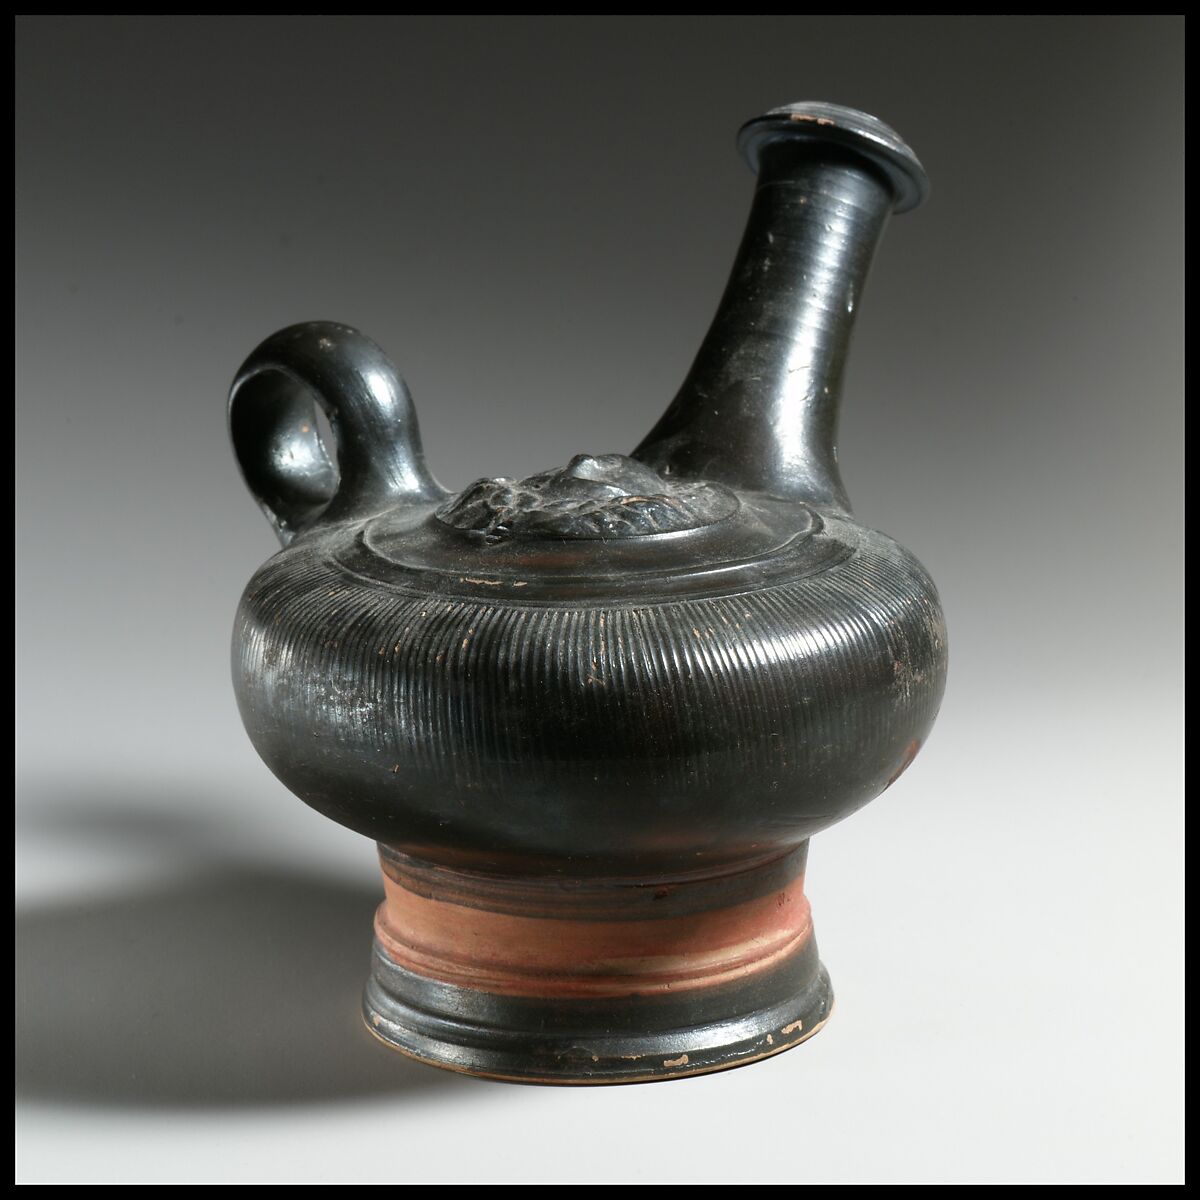 Terracotta guttus (flask with handle and vertical spout)